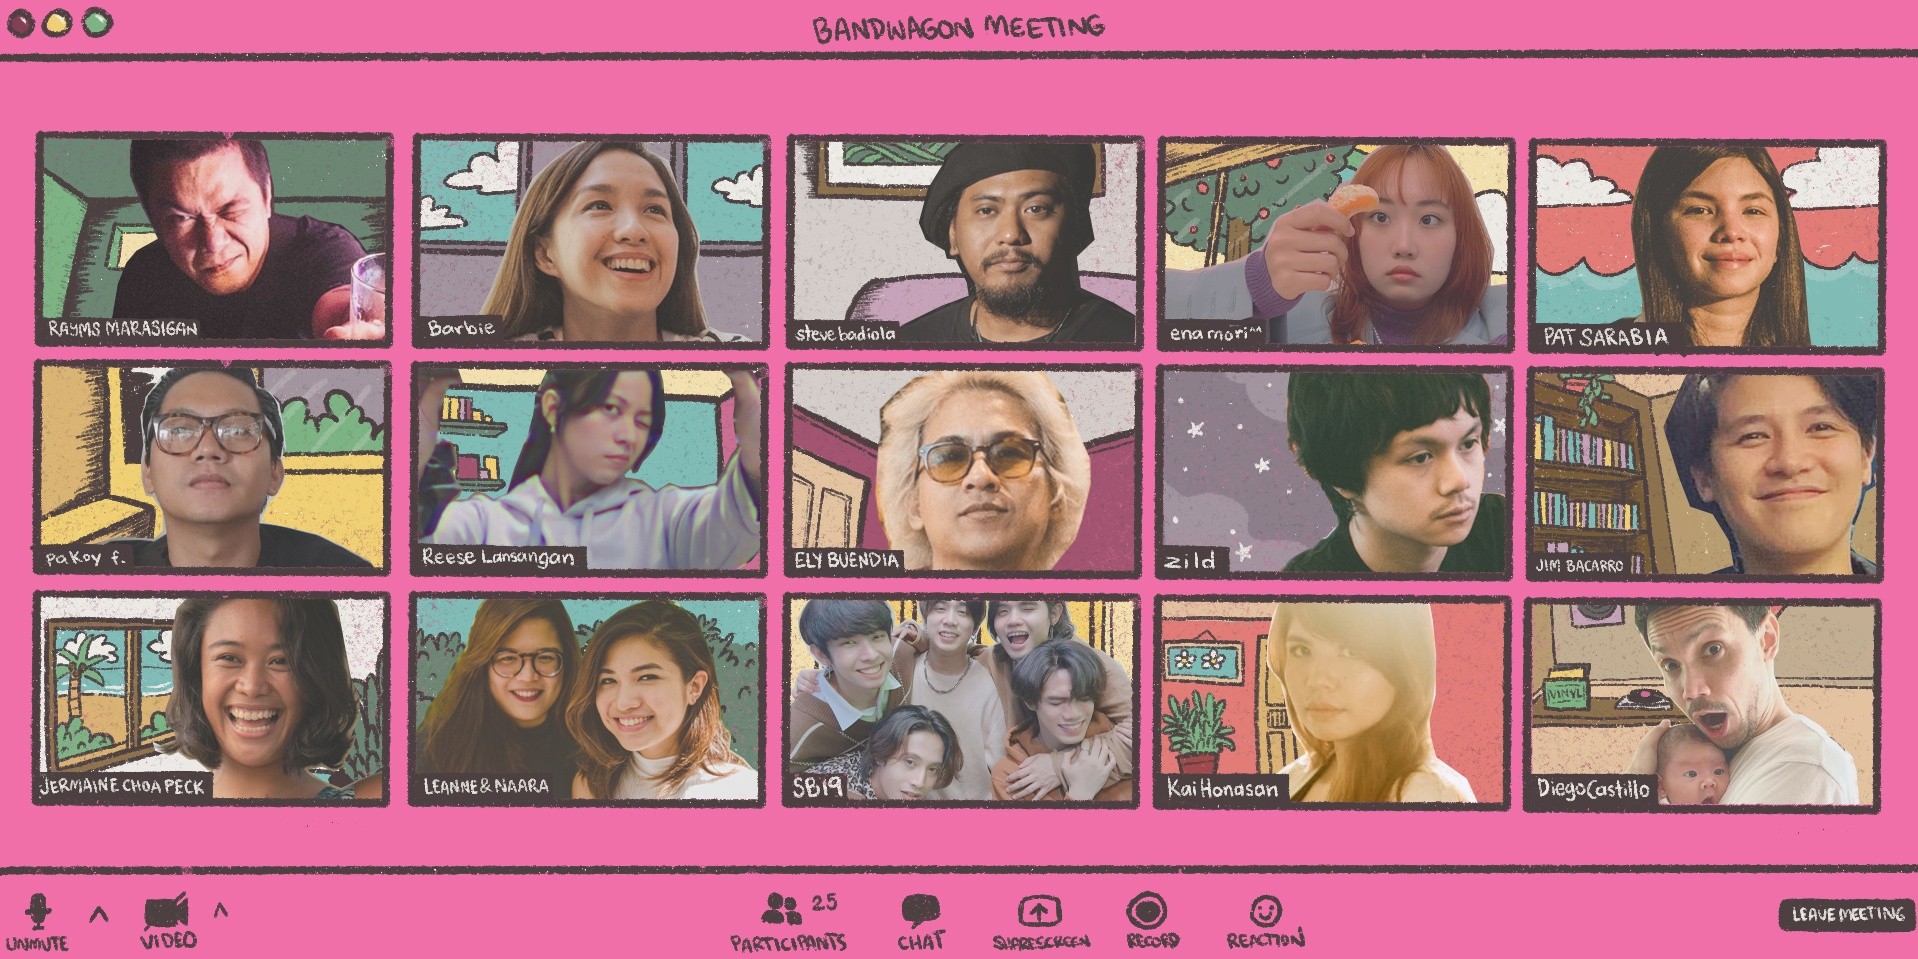 Checking in with Ely Buendia, Sandwich, SB19, Reese Lansangan, Typecast, and more after one year in lockdown